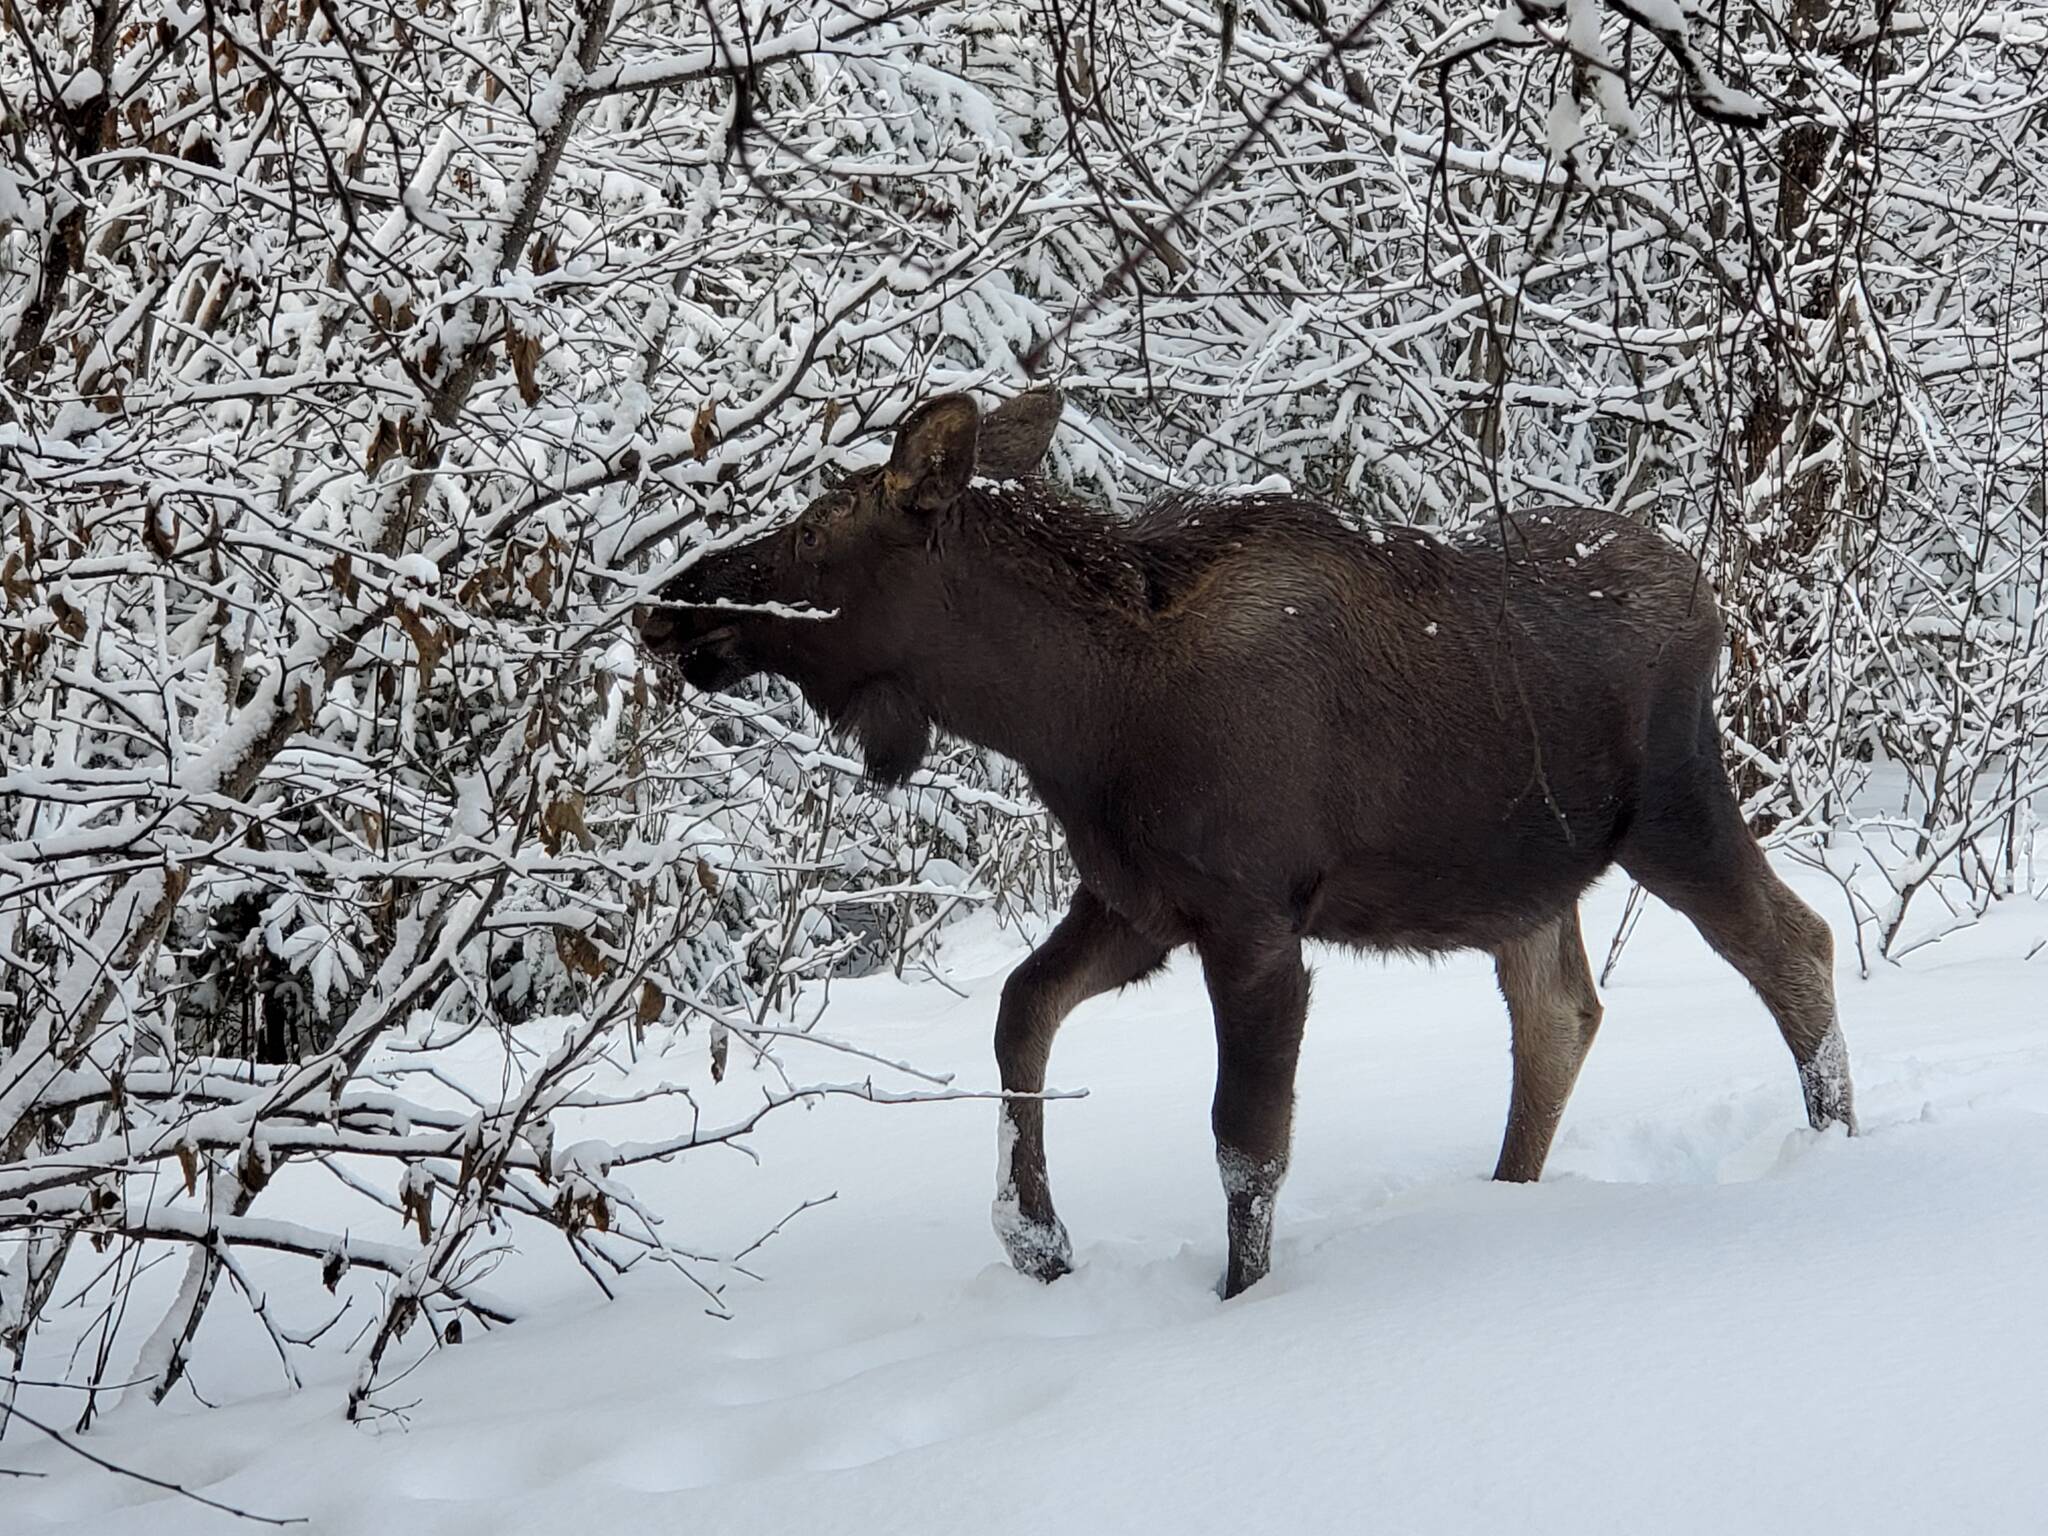 An young moose munches on alder branches on Wednesday, Jan. 18 in Anchor Point. Photo by Delcenia Cosman